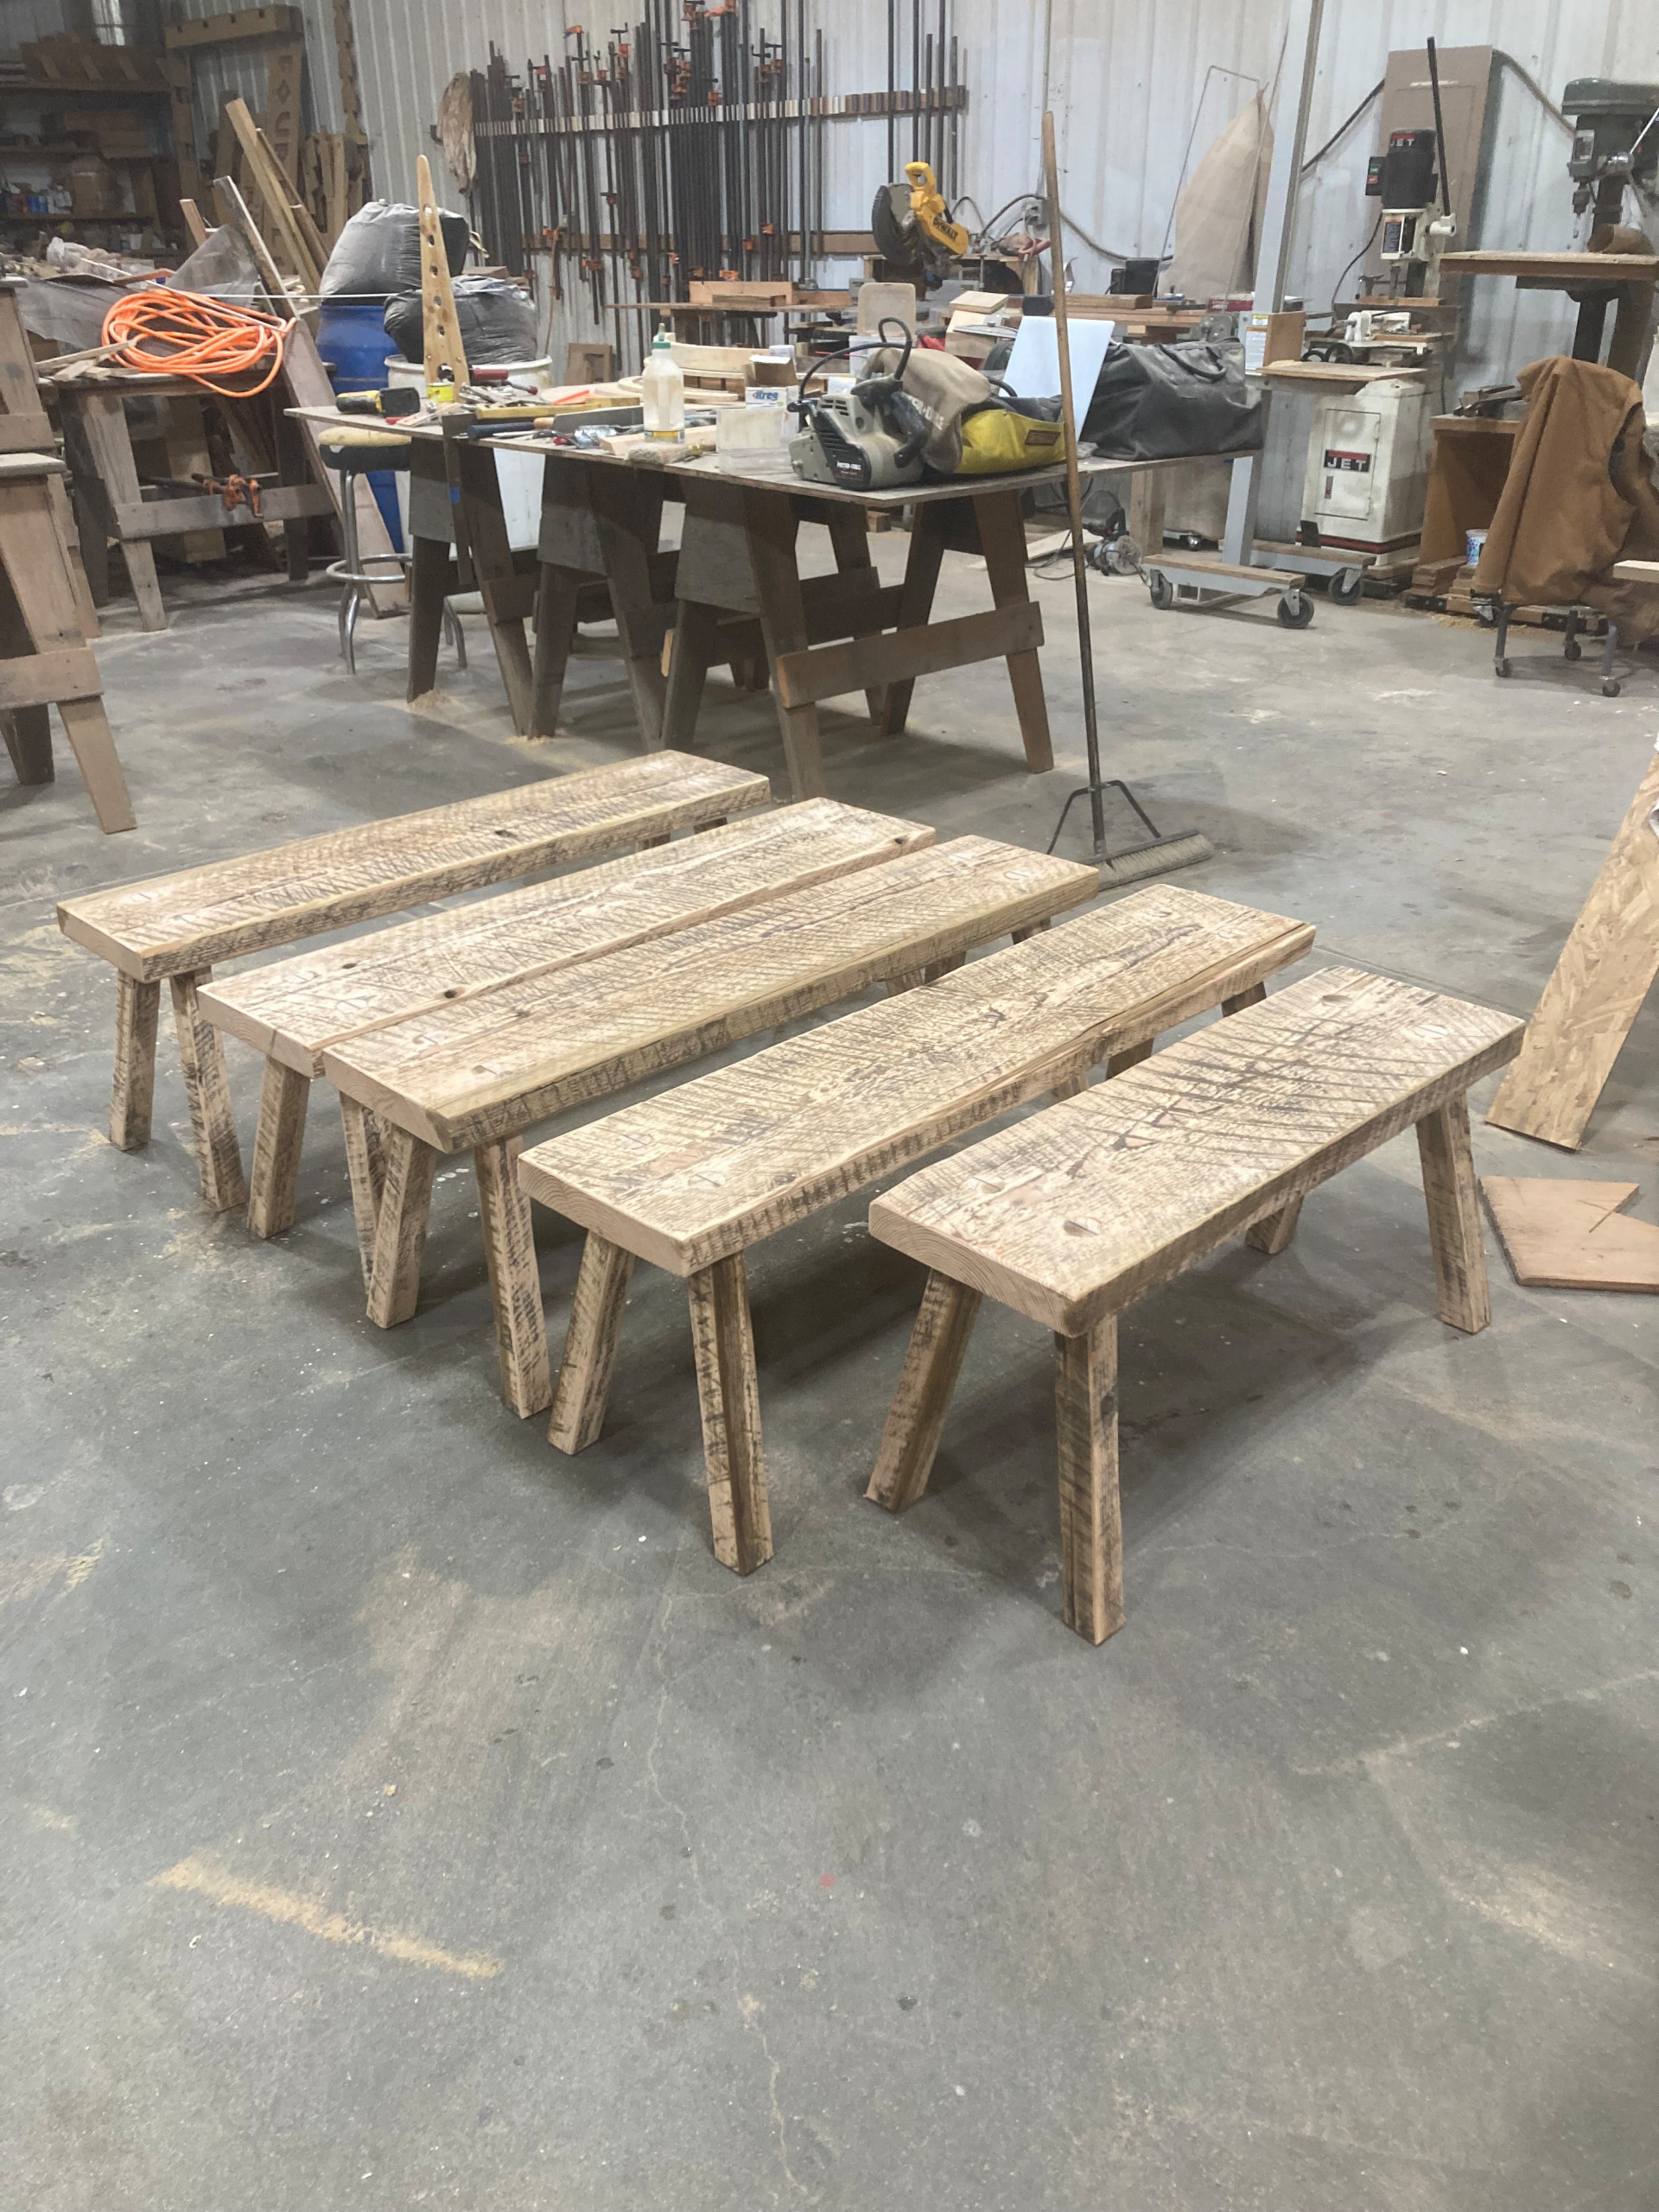 Rustic benches